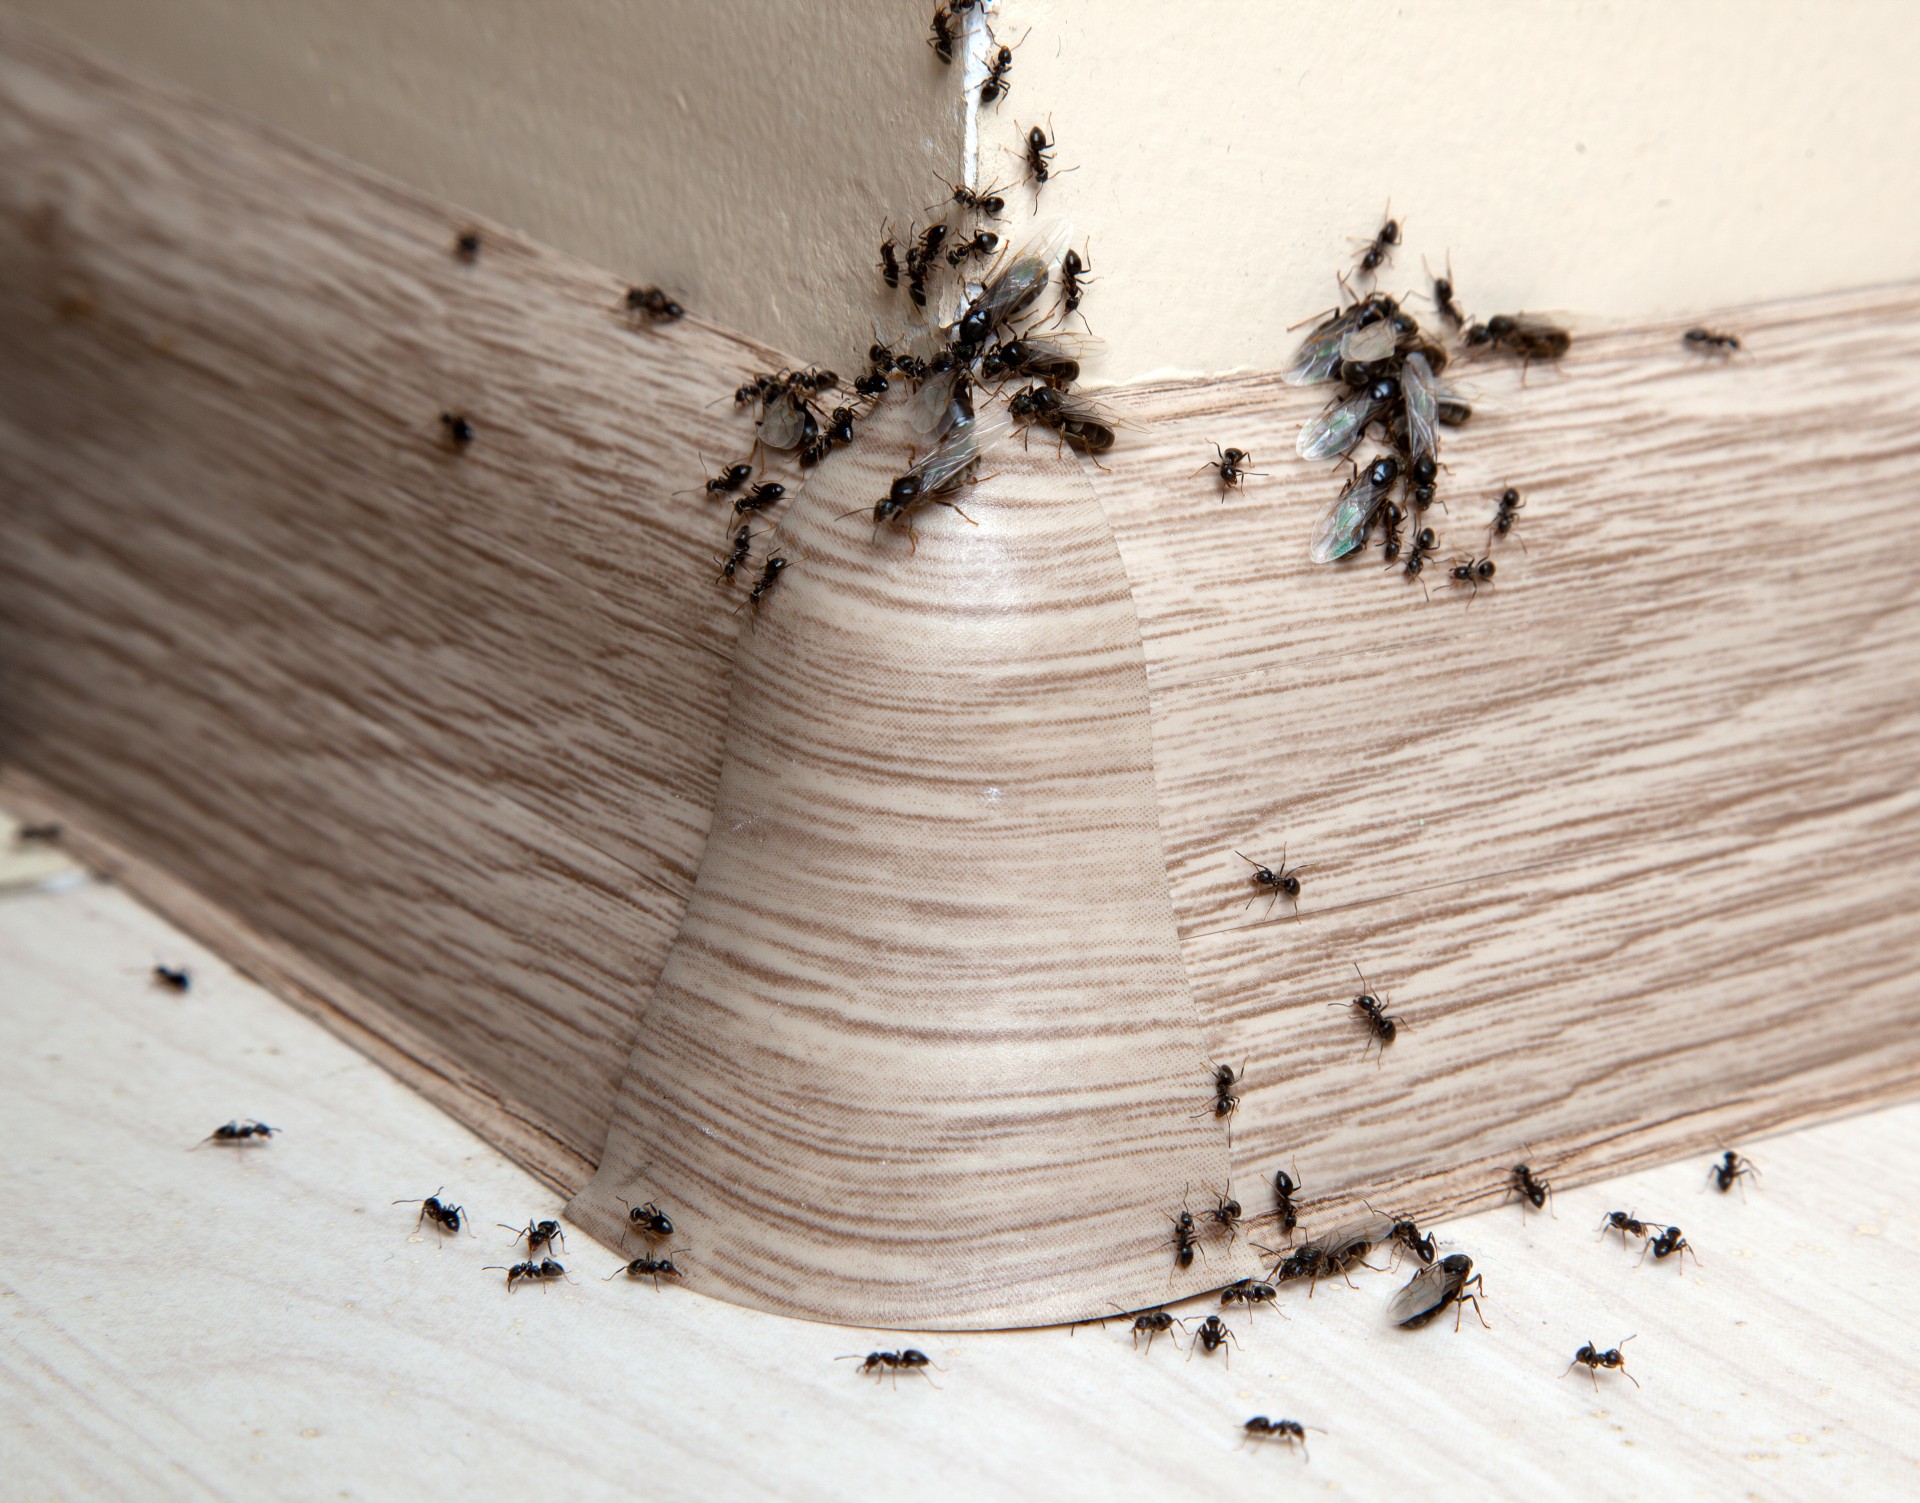 Ant Infestation, Pest Control in Colindale, Kingsbury, NW9. Call Now 020 8166 9746